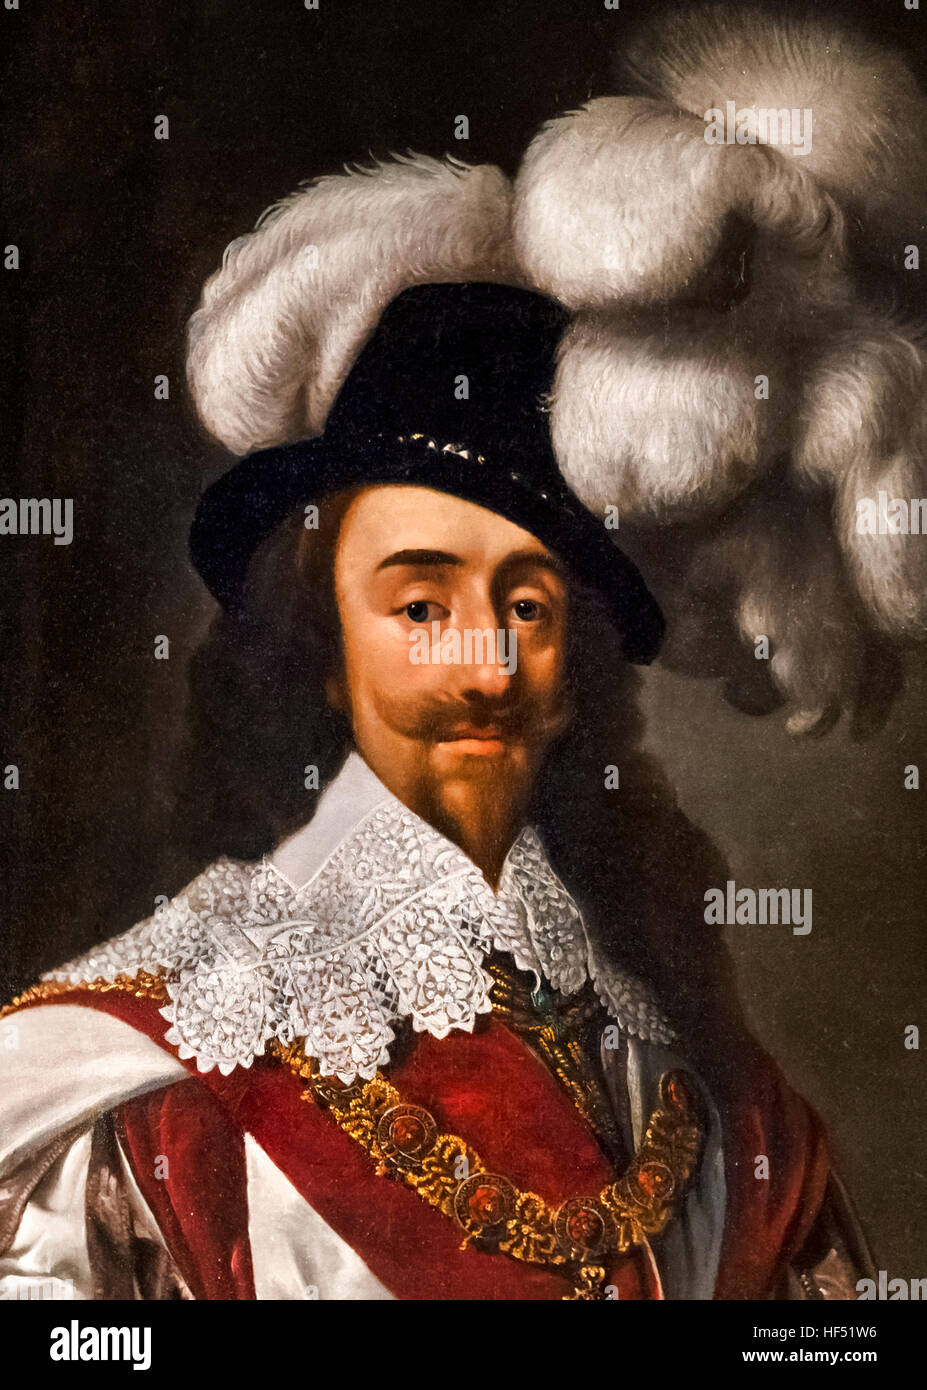 Charles I. Portrait of King Charles I of England, by Daniel Mytens the Elder, oil on canvas, 1633. This is a detail of a larger painting, HF51W5 Stock Photo